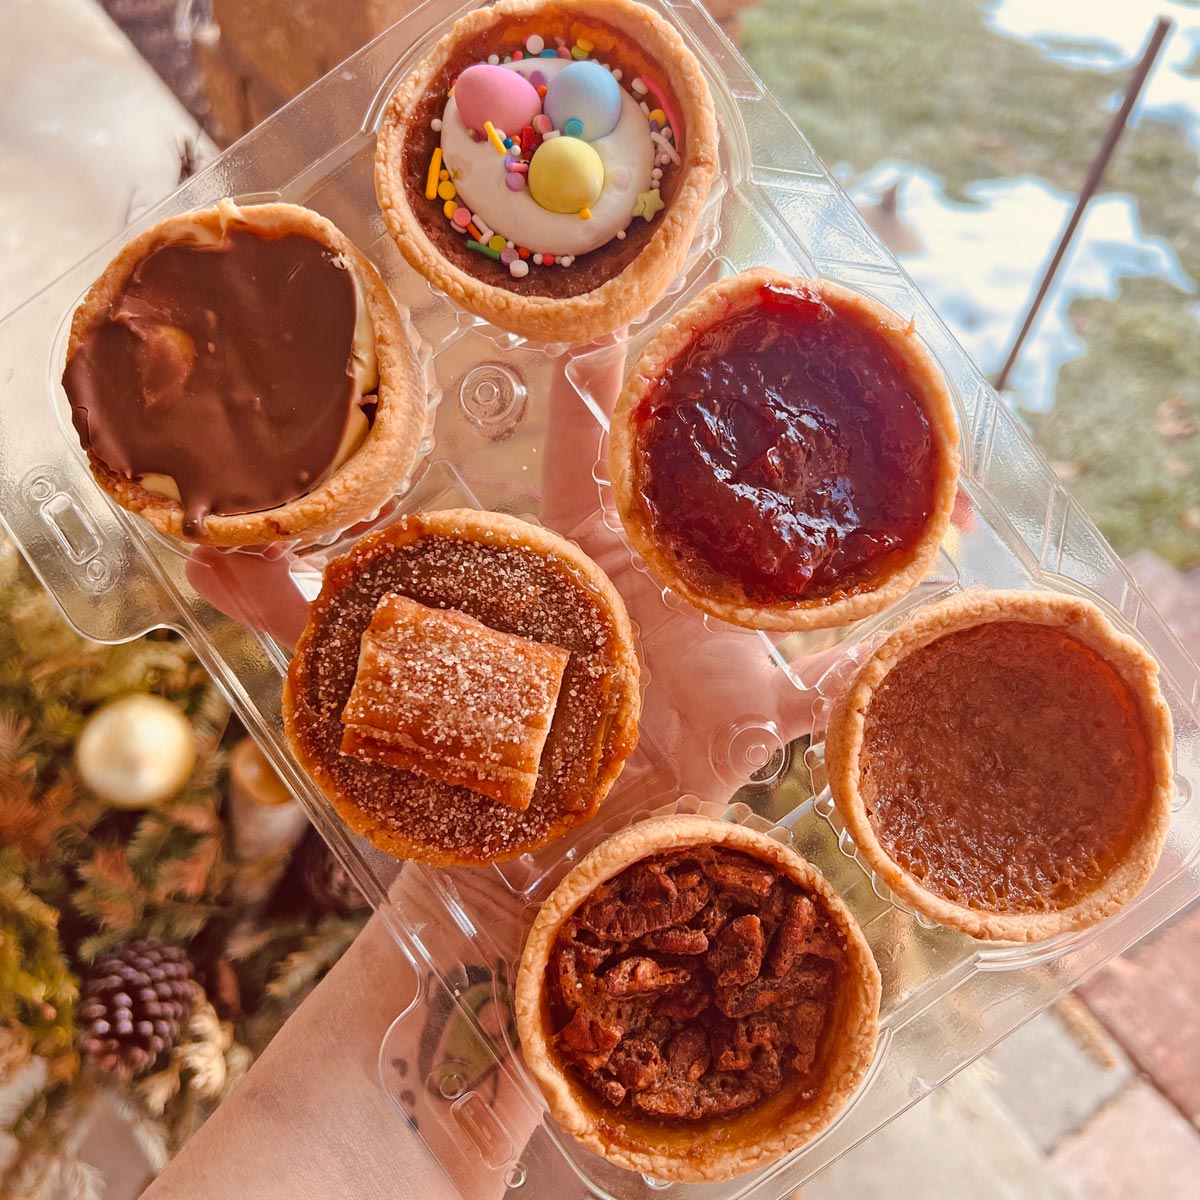 Seasonal Butter tarts on thank you page